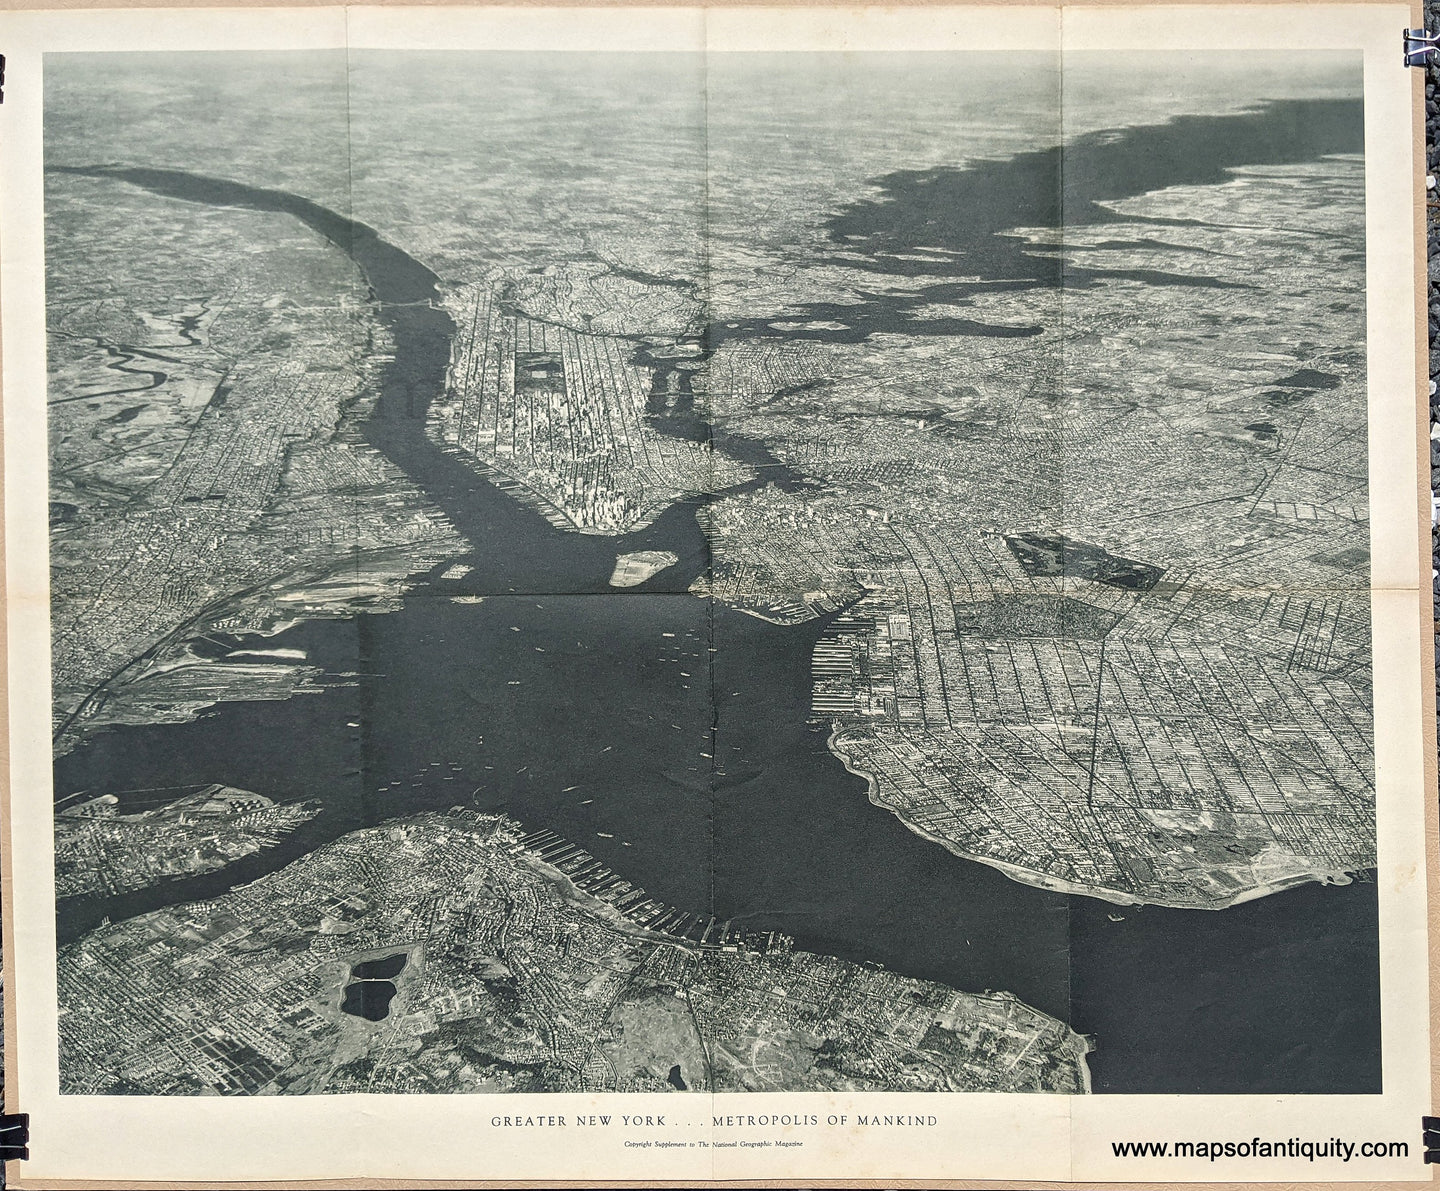 Genuine Antique Aerial Photograph Poster-Greater New Yorkâ€¦ Metropolis of Mankind-1933-National Geographic-Maps-Of-Antiquity